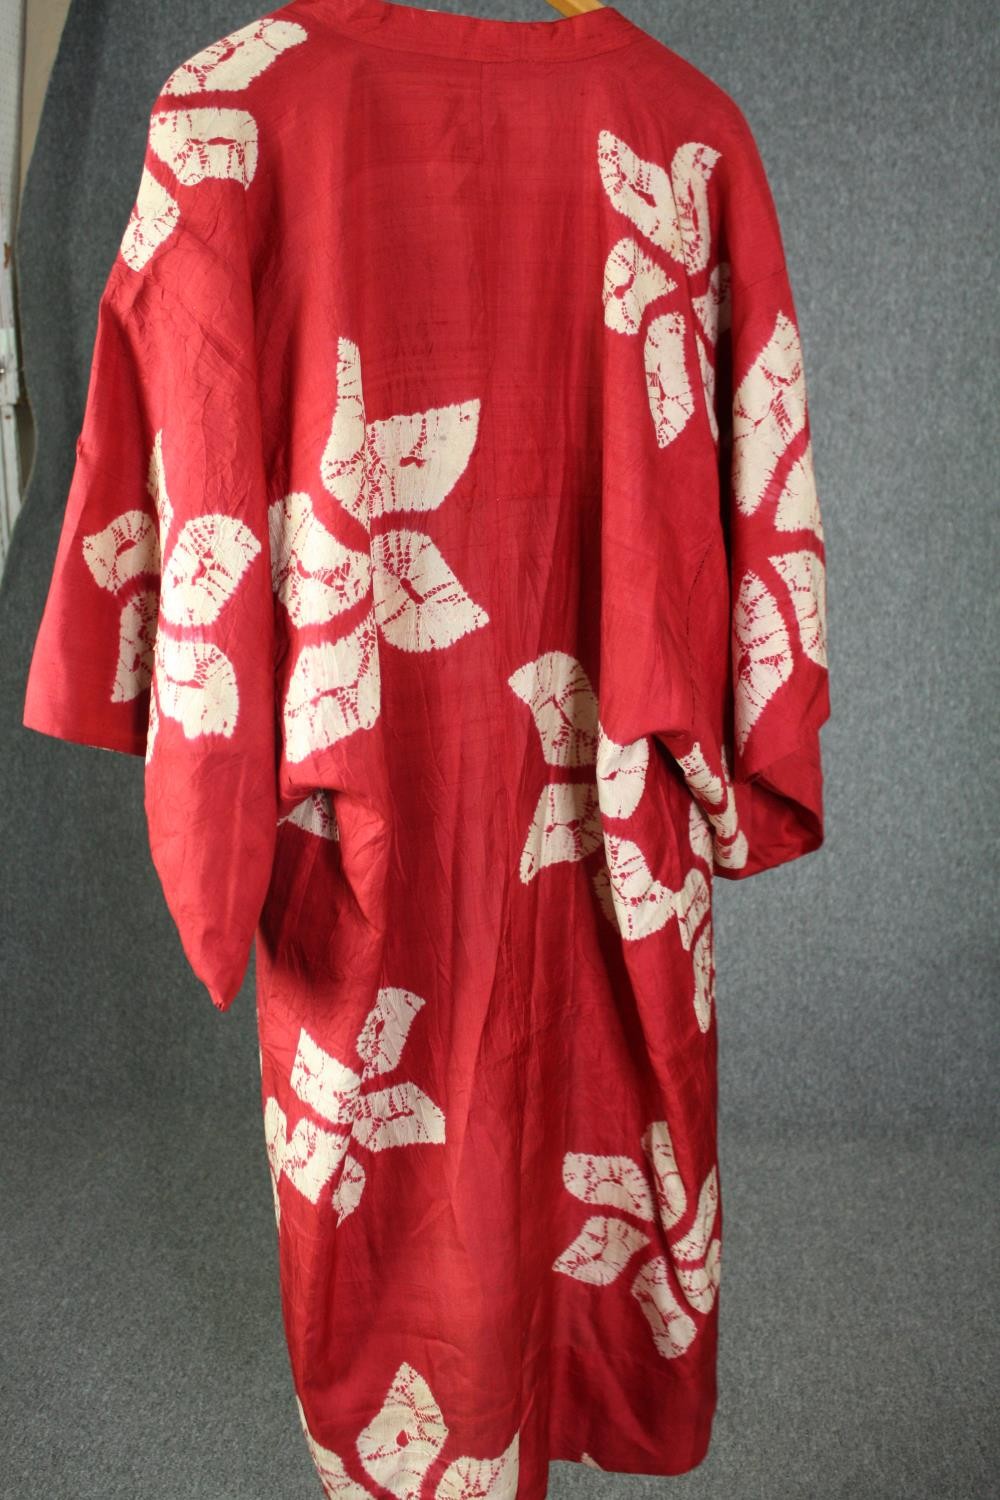 Two early 20th century silk Japanese kimonos, red Michiyuki and a black Haori. one with tie dye - Image 10 of 10